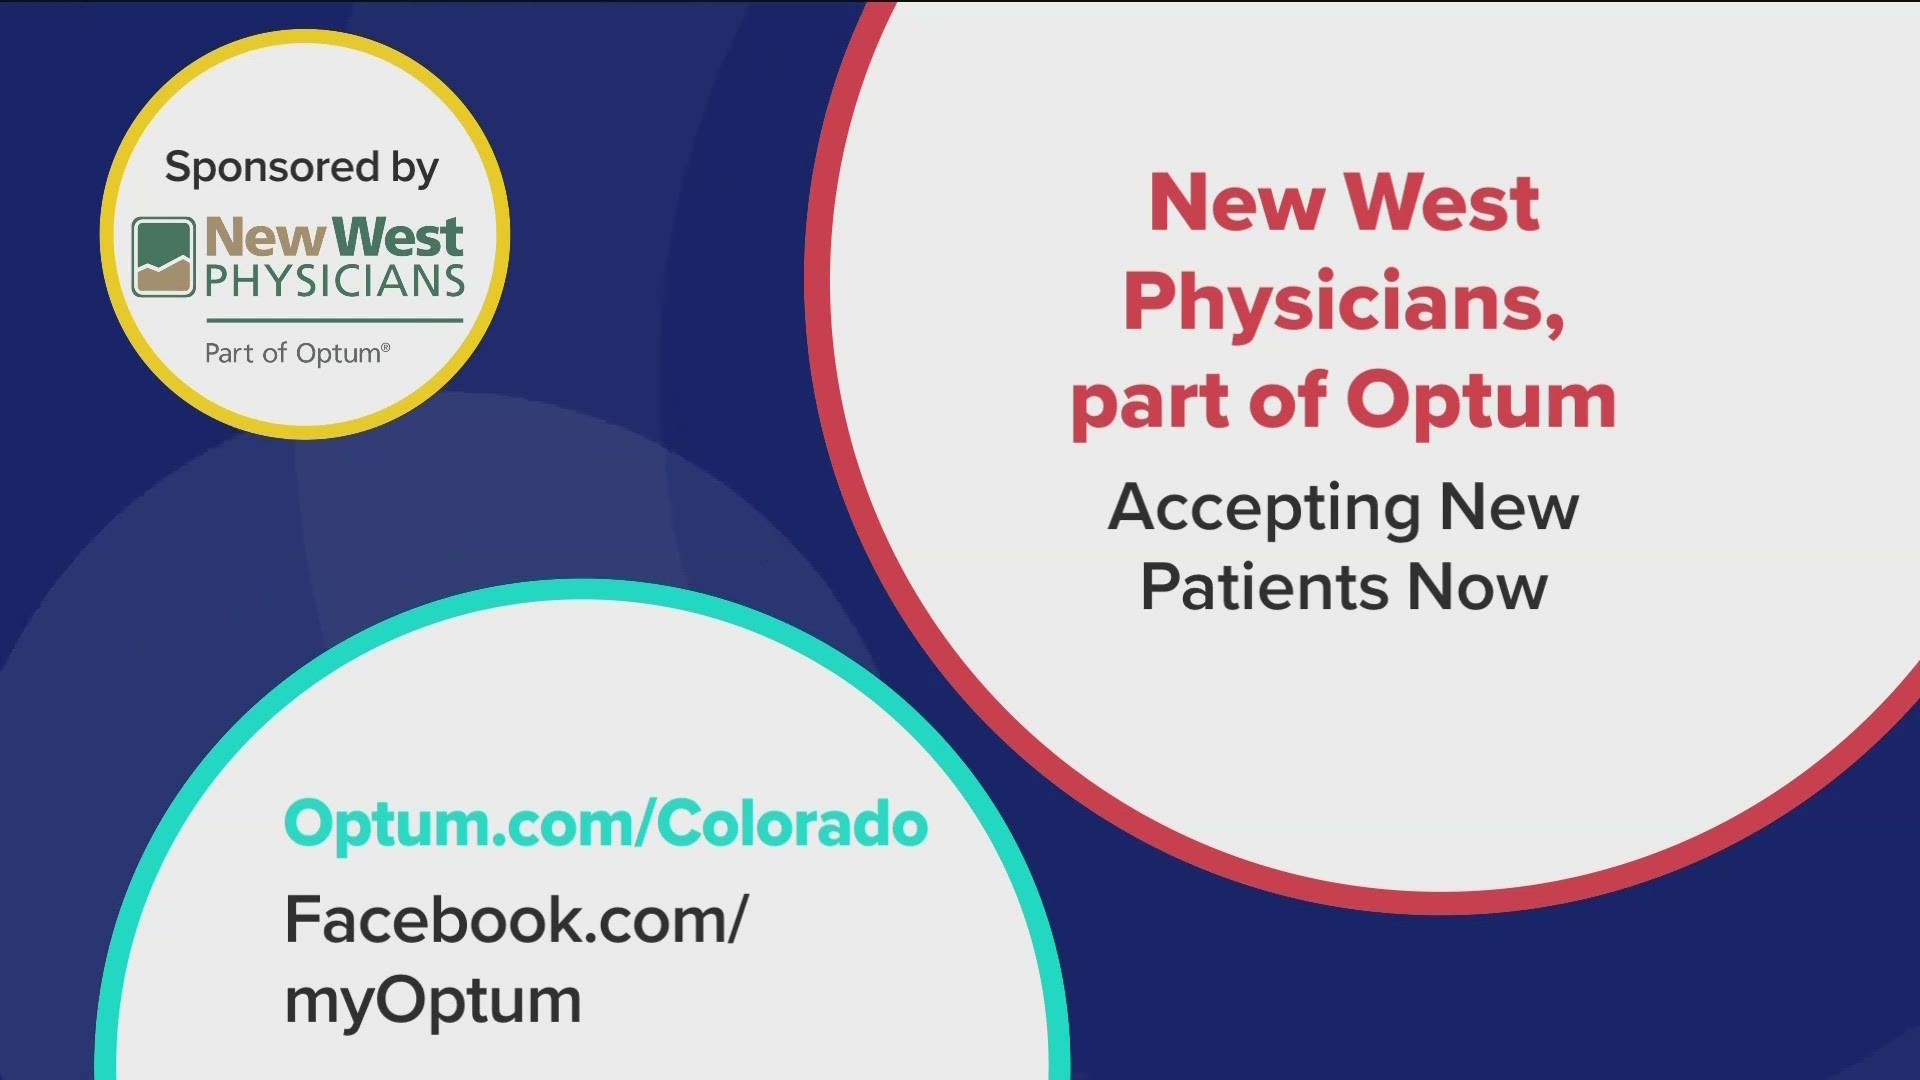 New West Physicians, part of Optum is accepting new patients at locations around the Denver Metro. Visit Optum.com/Colorado to learn more. **PAID CONTENT**